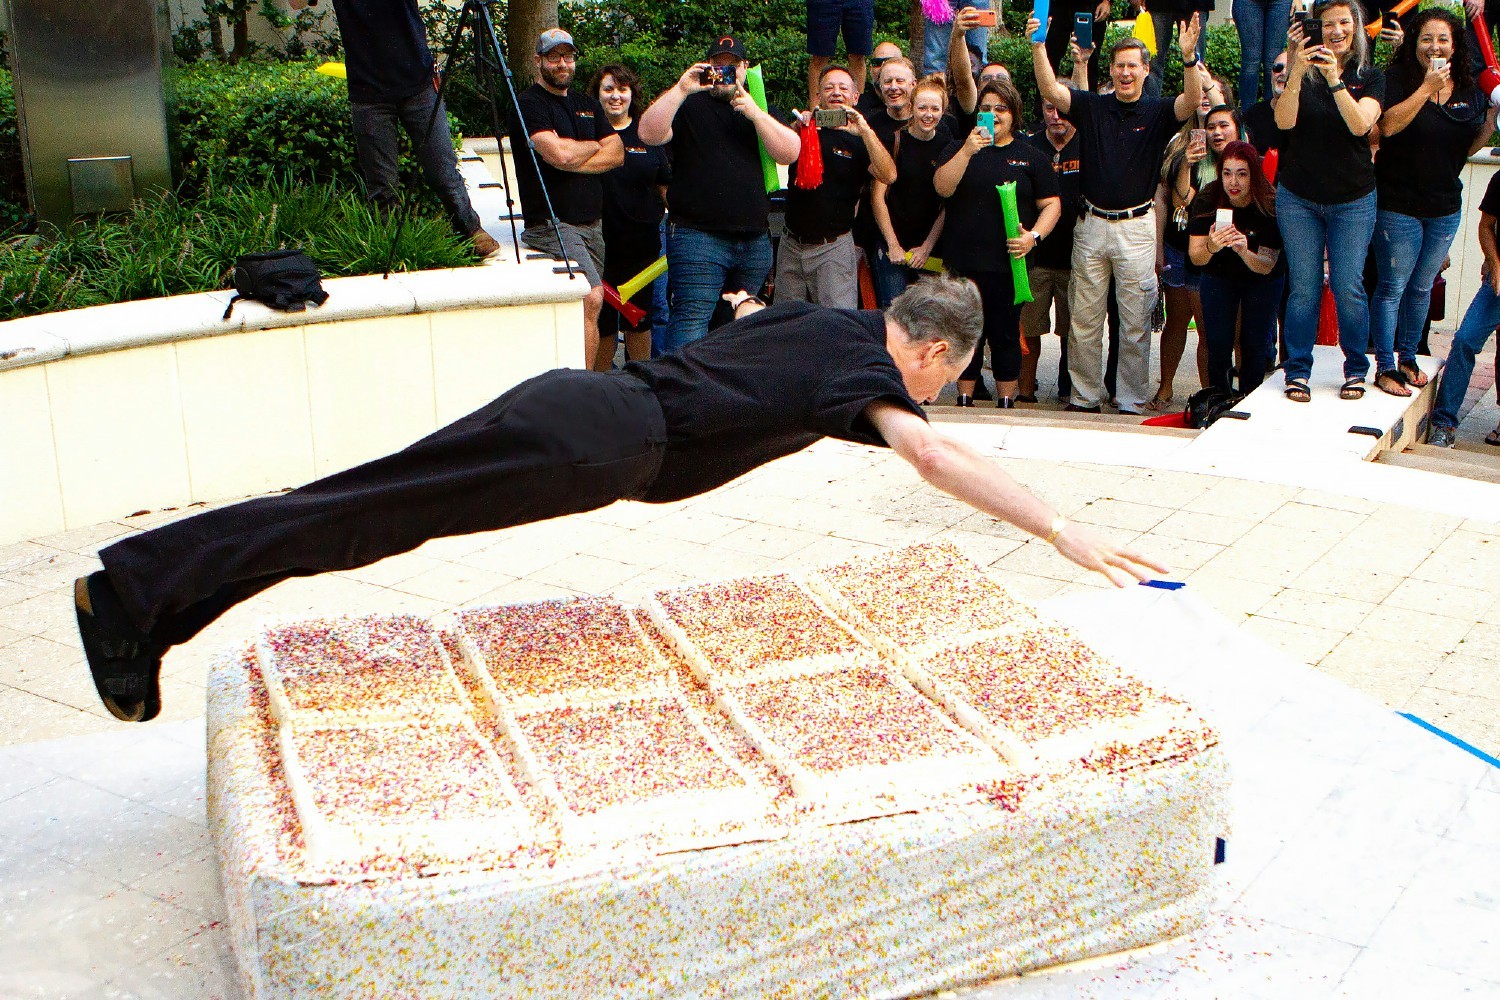 KnowBe4’s one-of-a-kind CEO drives our core value of having fun while you work! How many other CEOs jump in giant cakes?